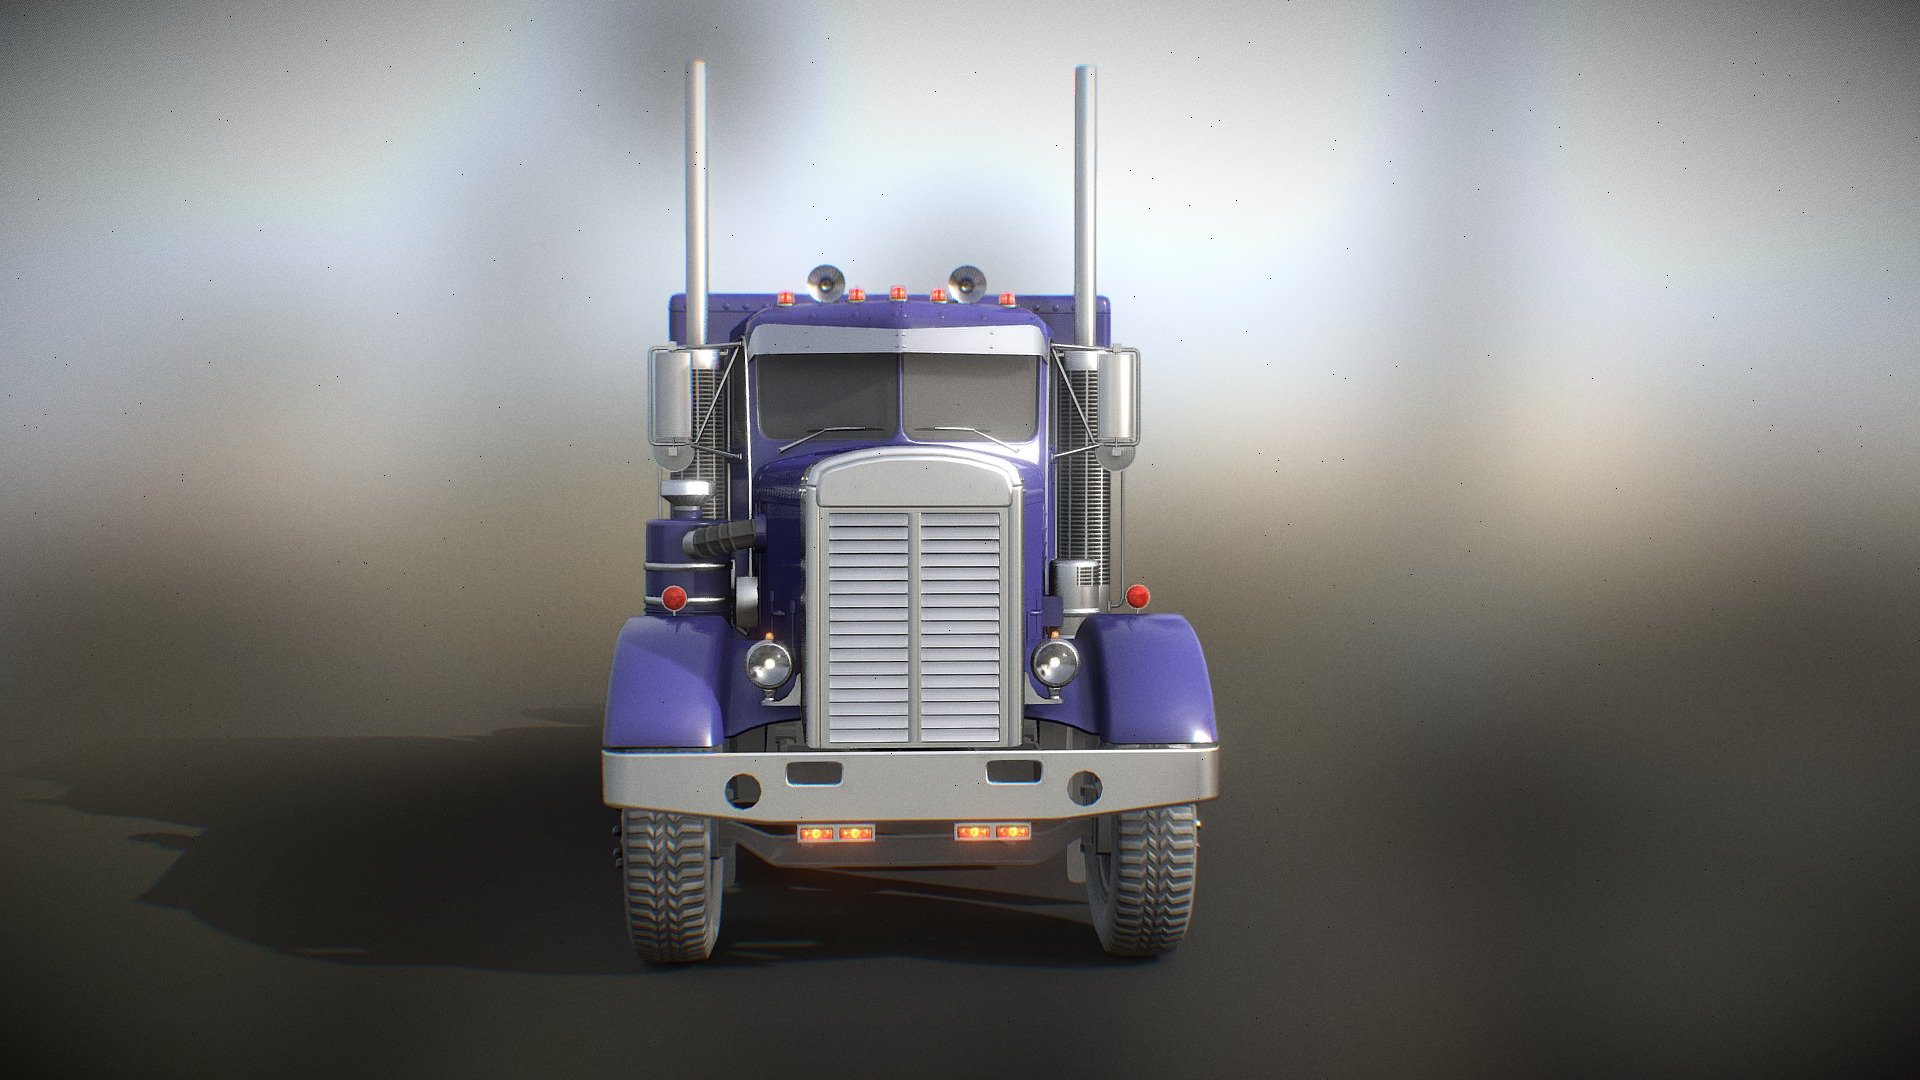 Models from mobile game - BIG RIG Racing. Retro ivent 3d model